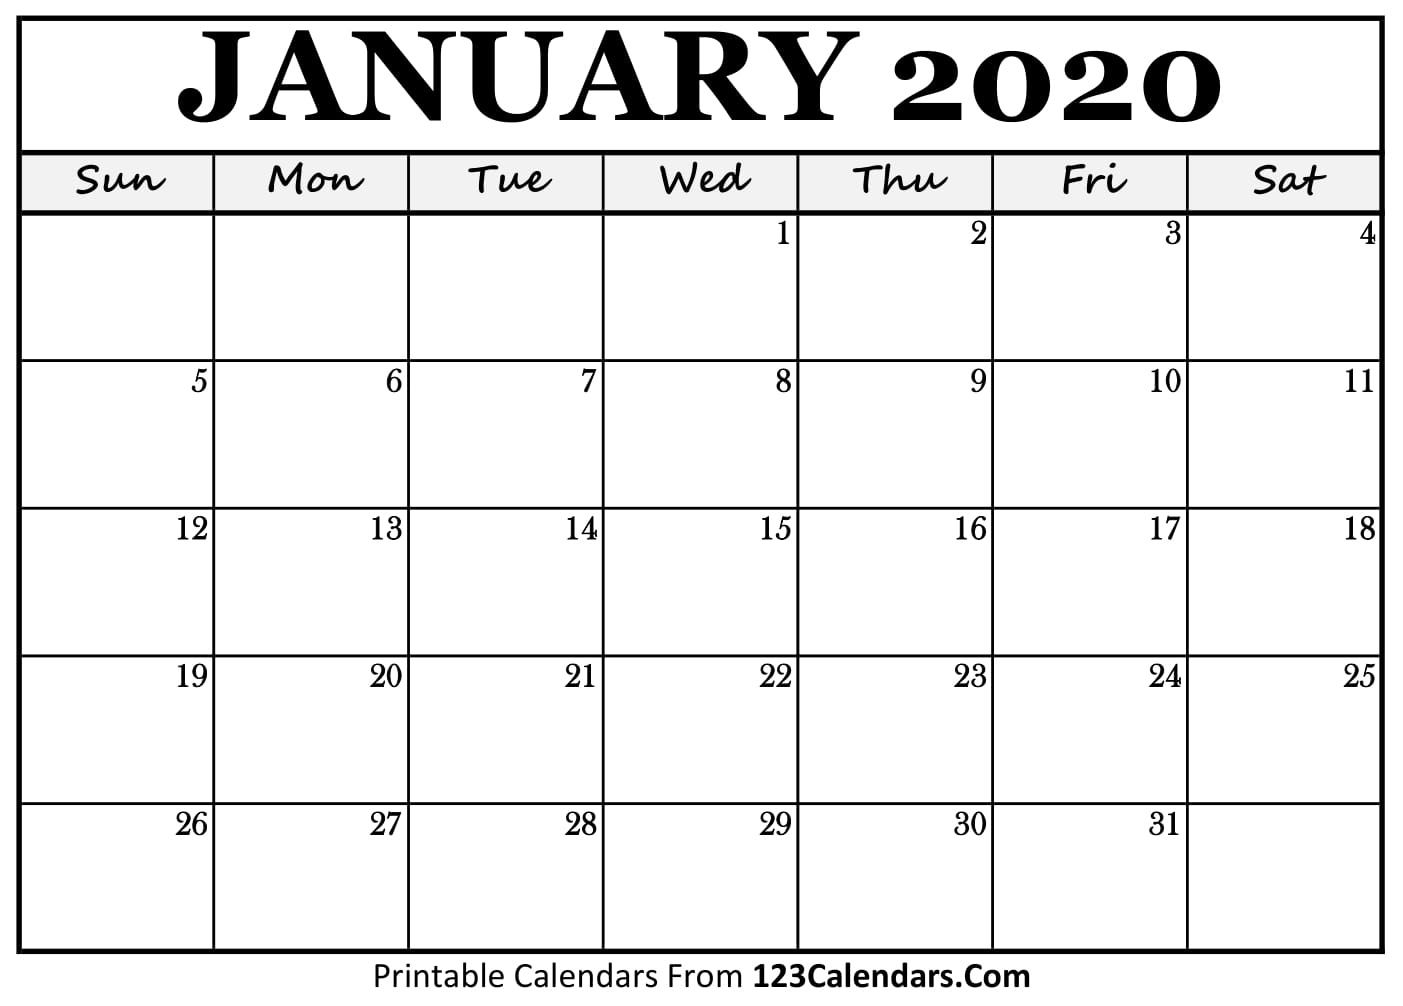 Exceptional Blank Calendar Template 2020 No Weekends | Free